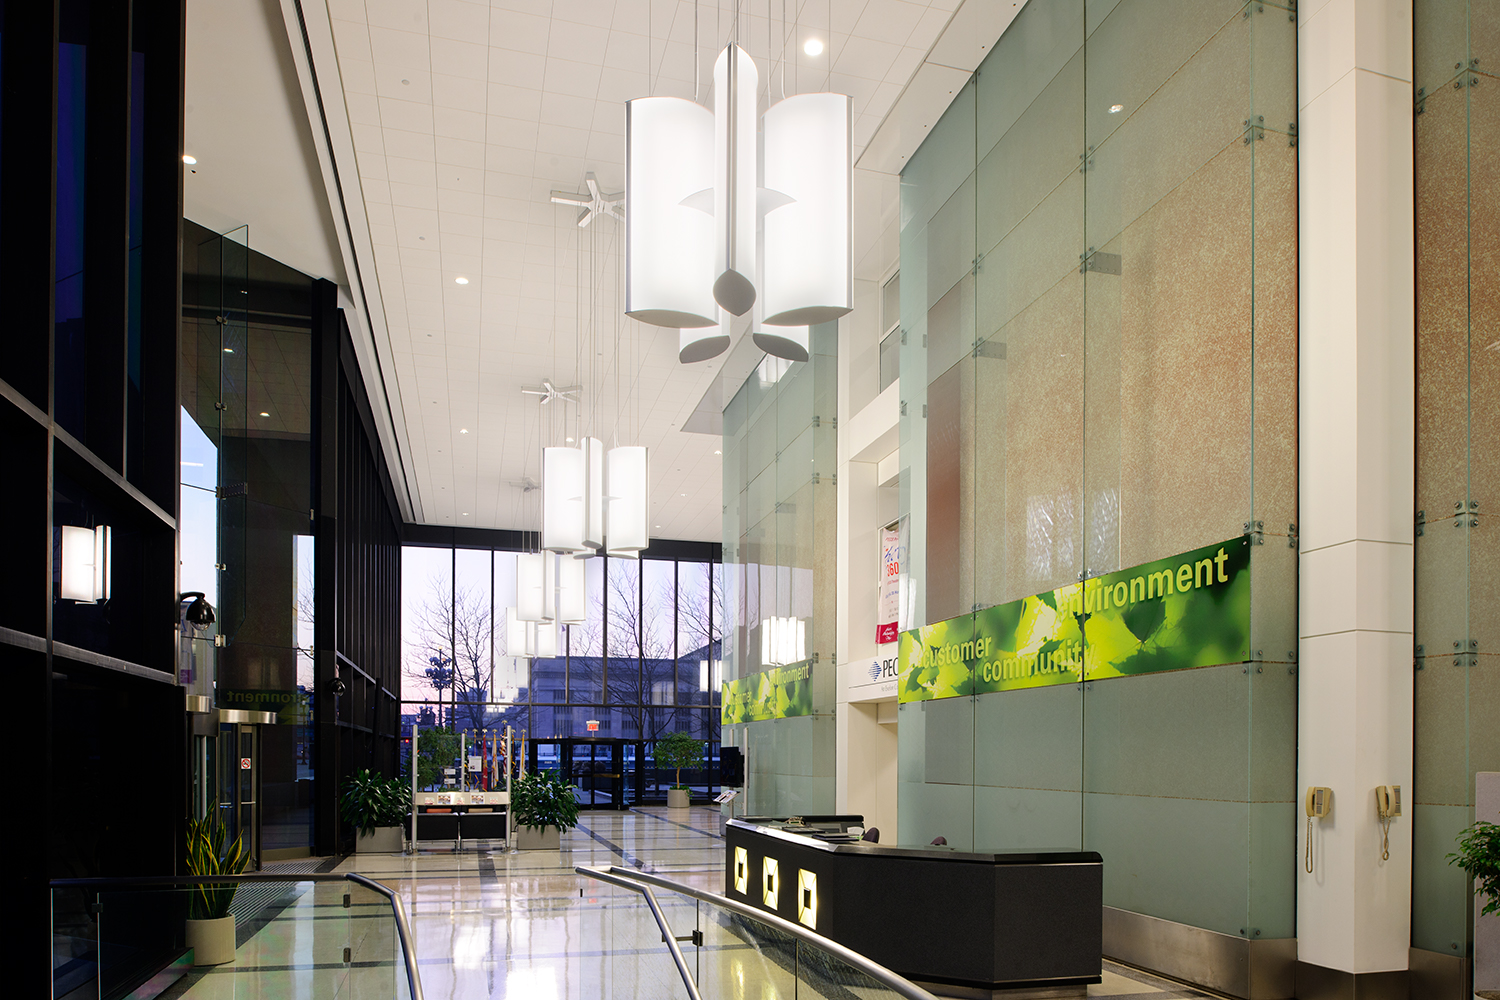 Air Foil pendants in a distinct lobby lighting design, grouped together in flower shapes.